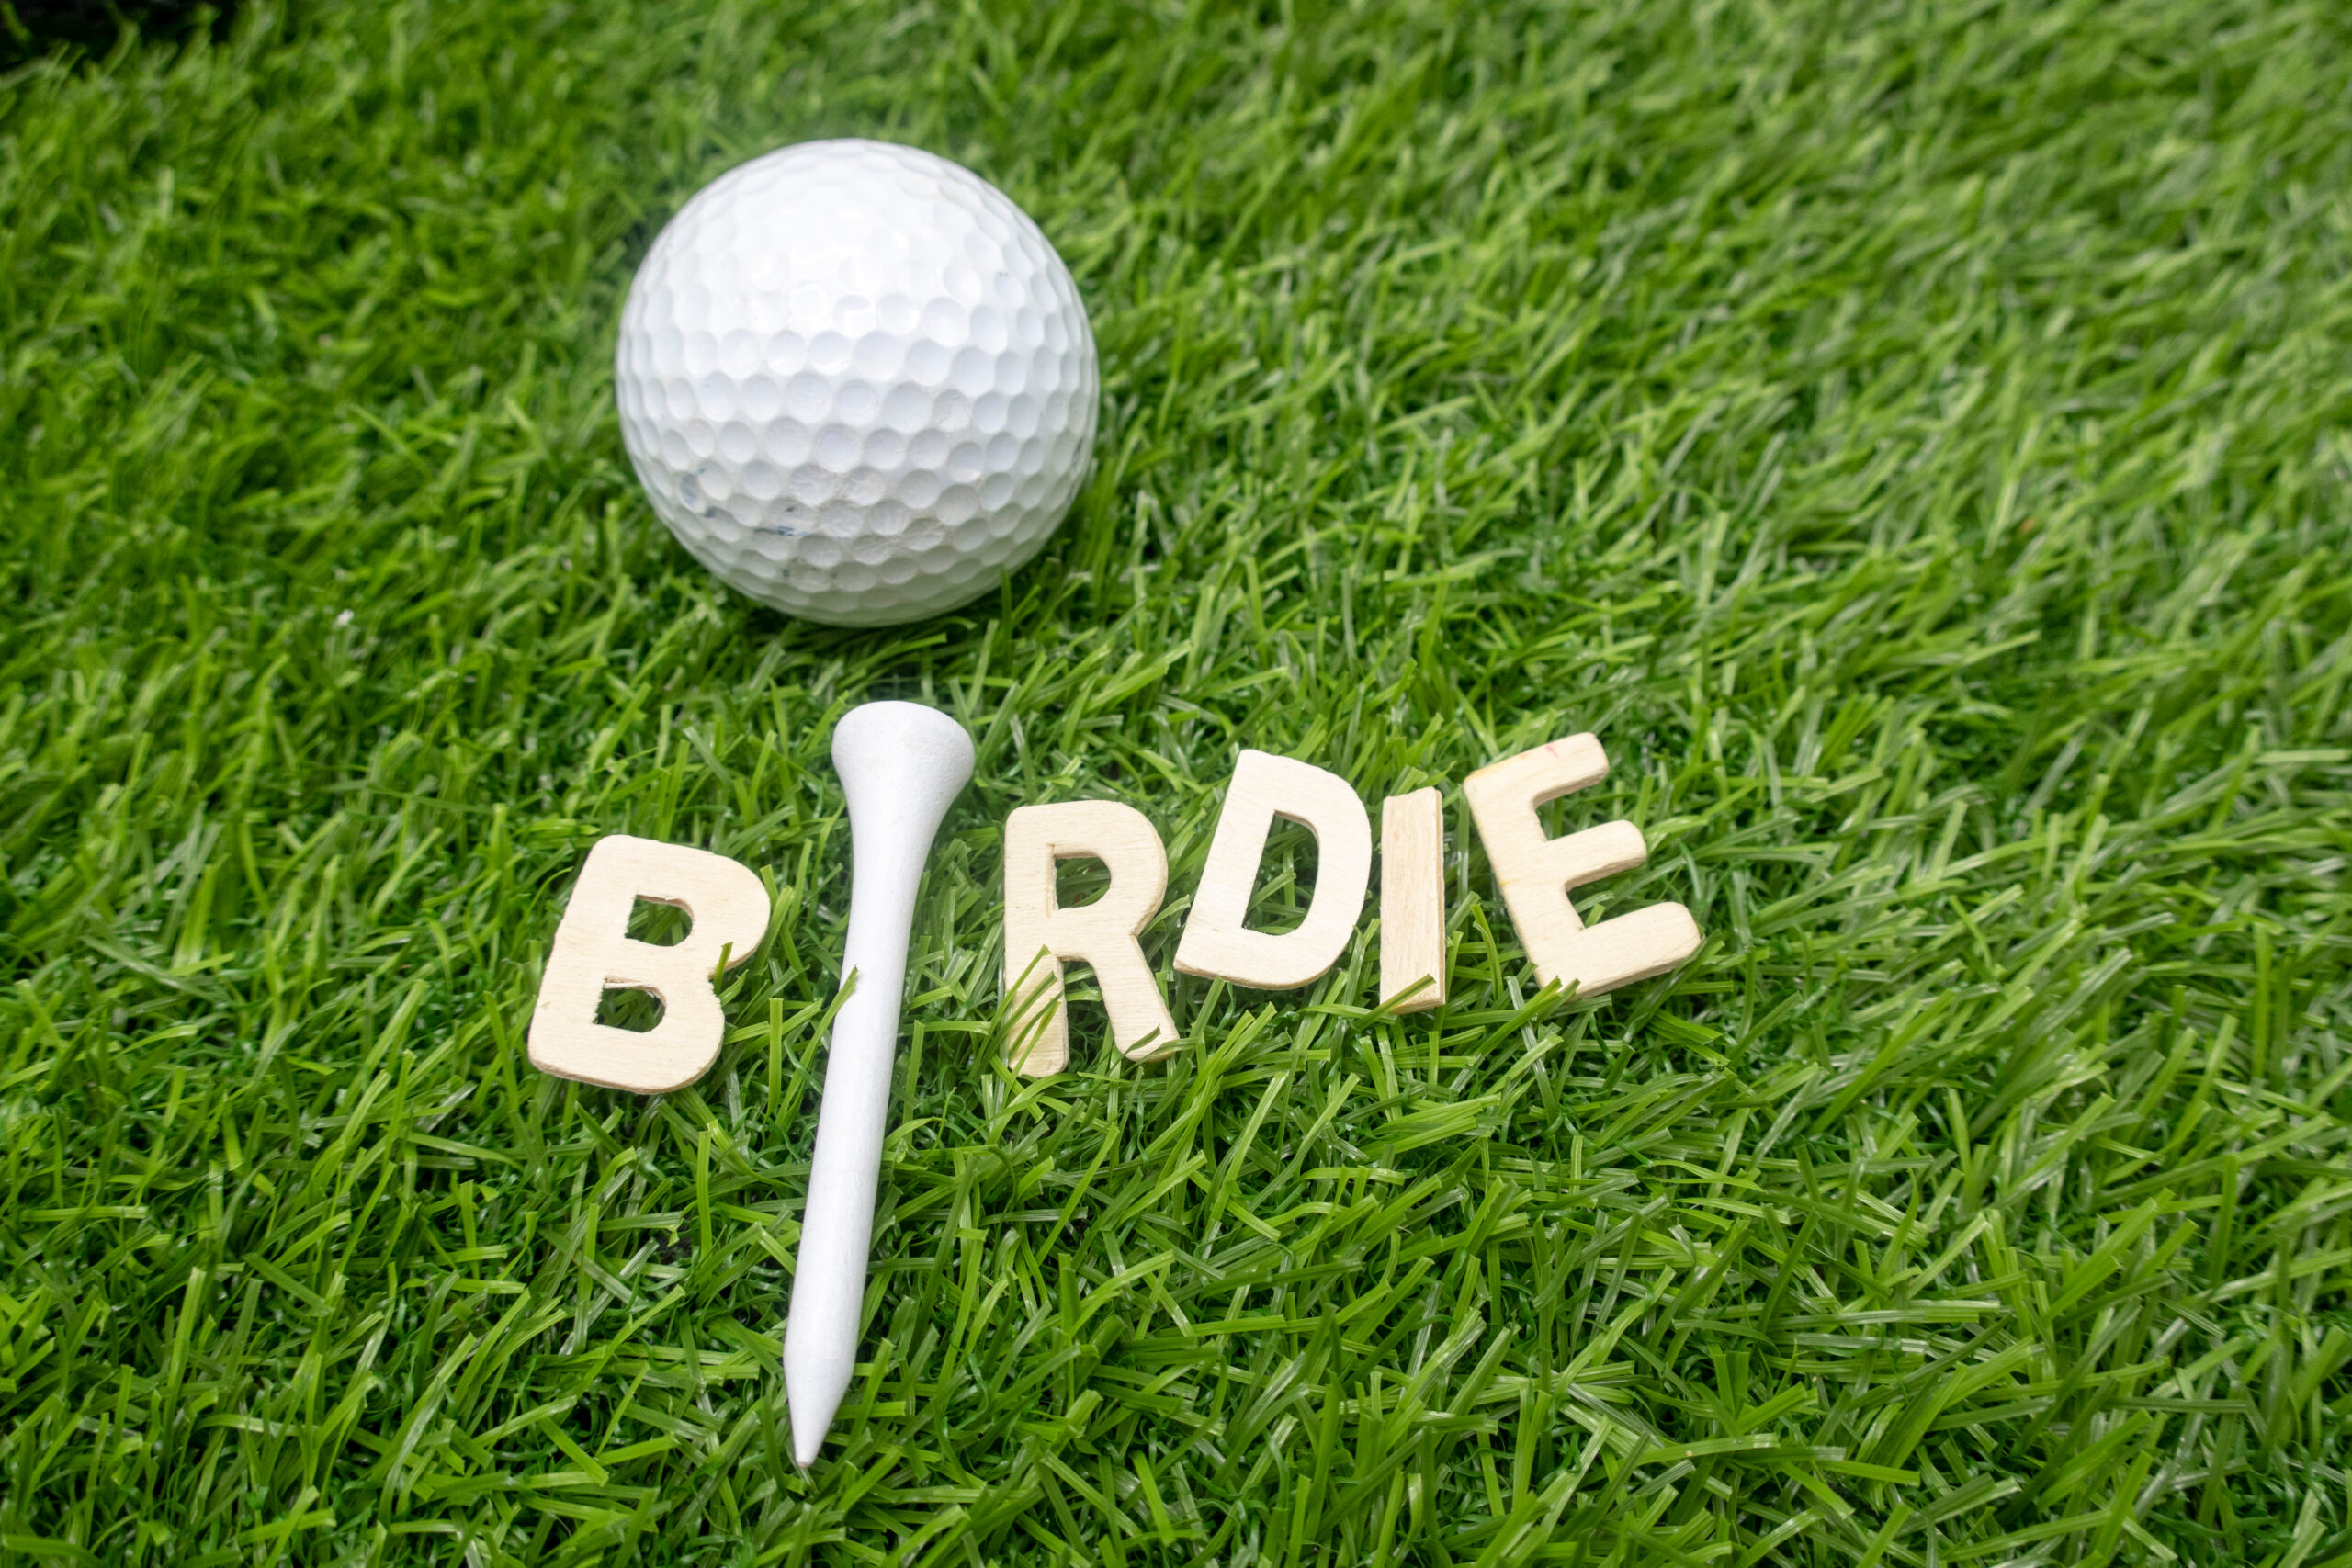 Birdie,With,Golf,Ball,Is,On,Green,Grass